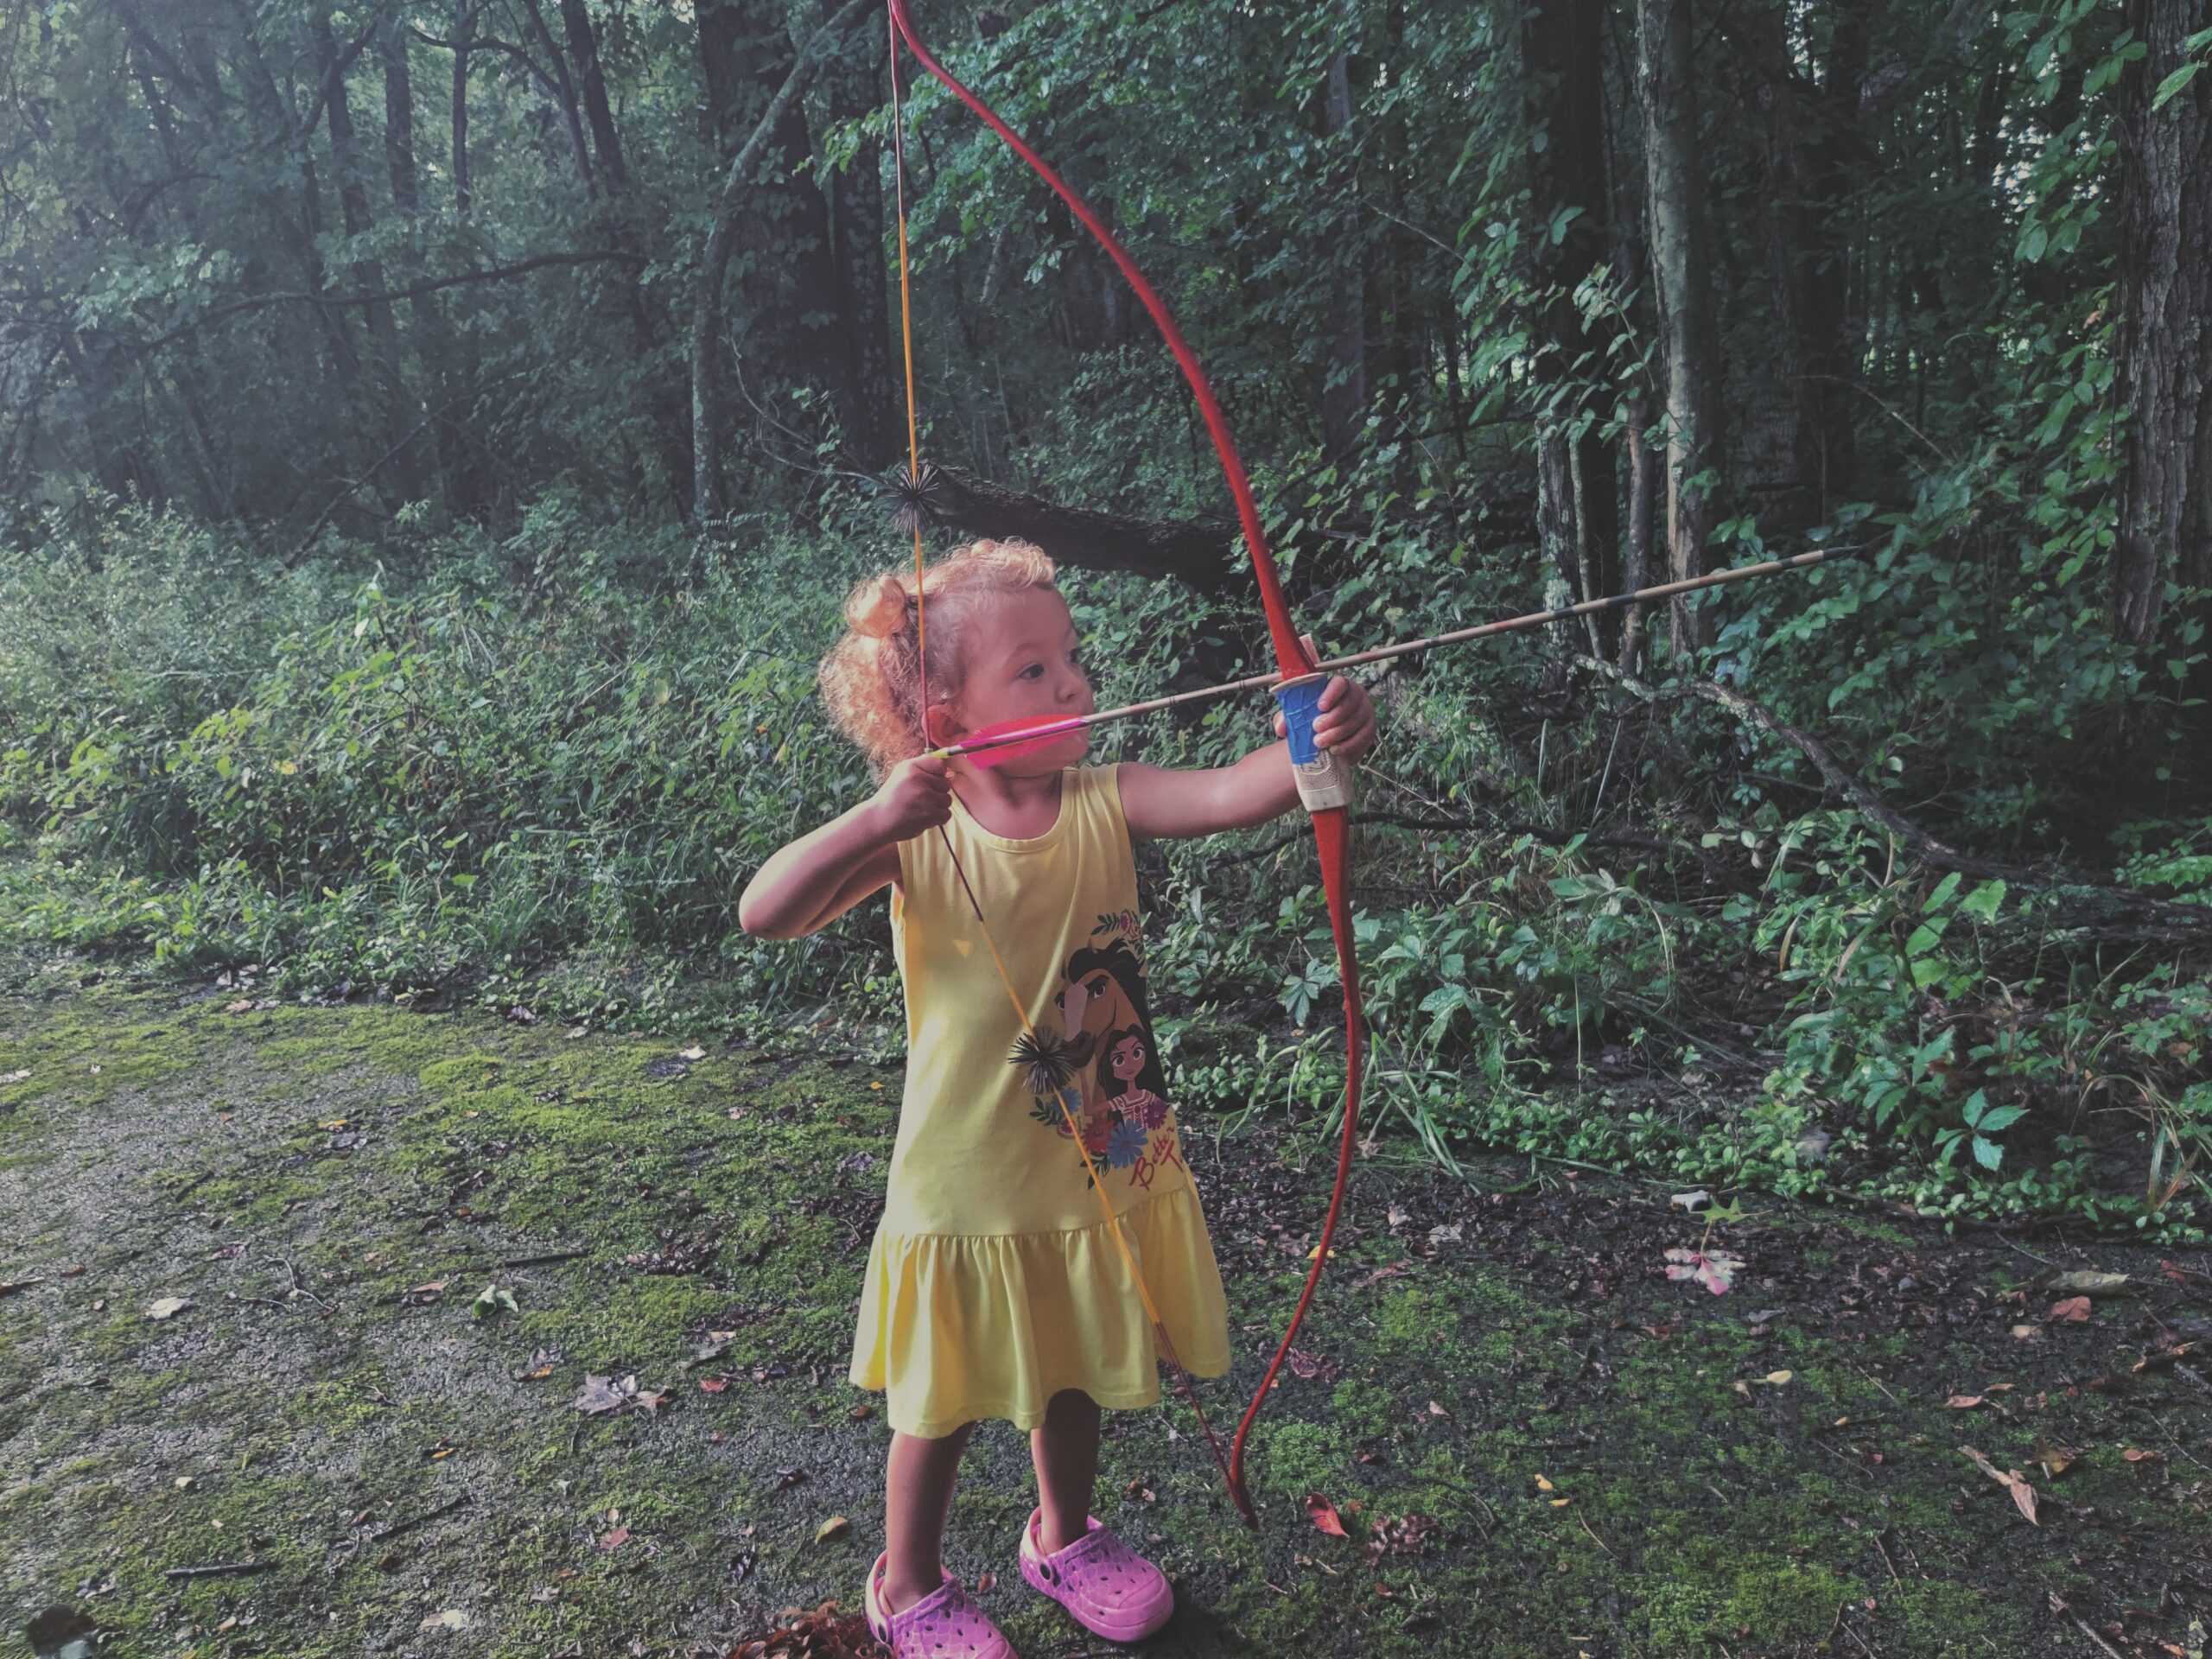 Teaching kids archery doesn't have to start at a certain age.